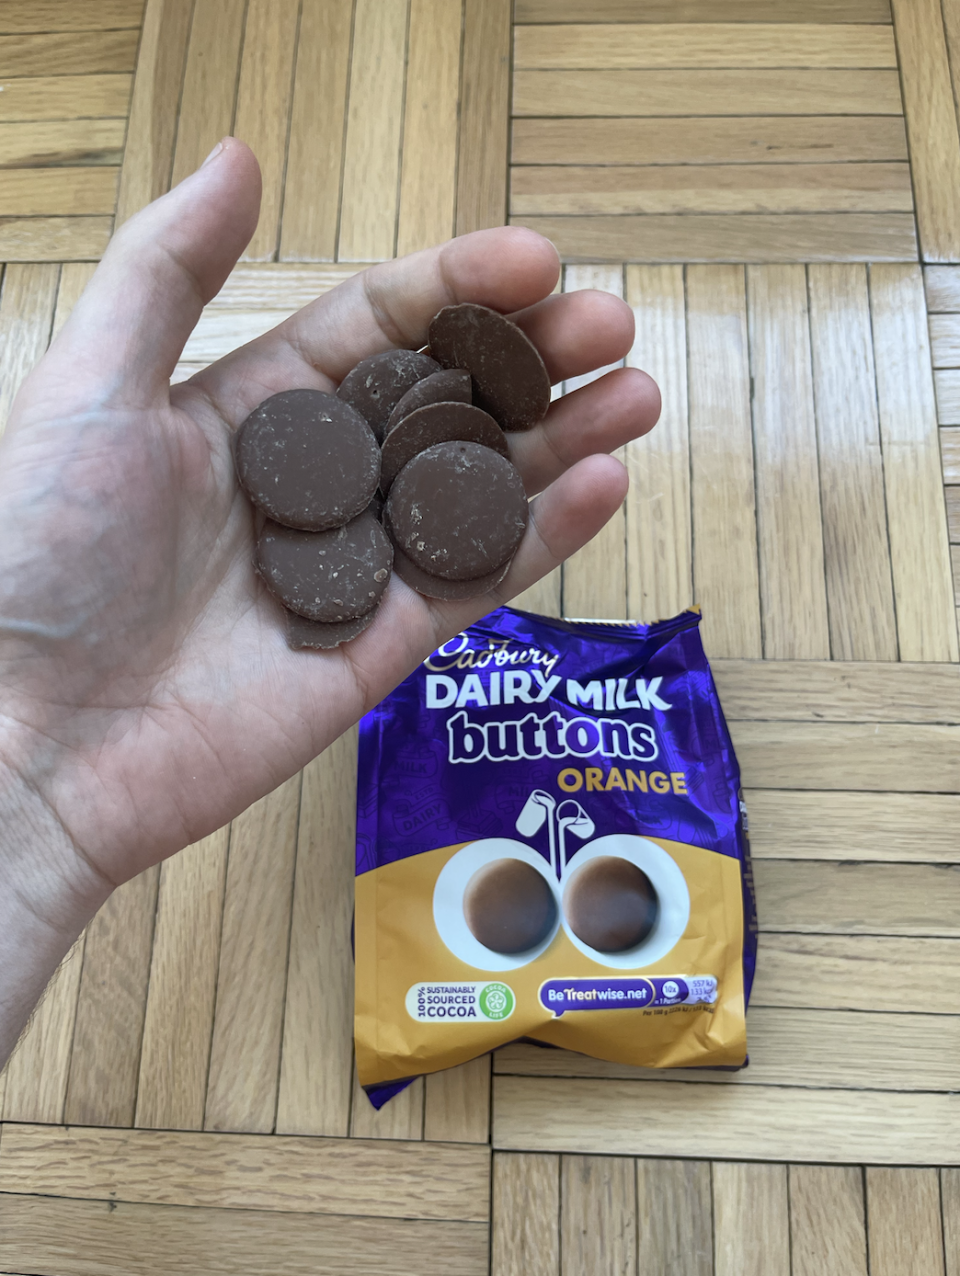 Hand holding several Cadbury Dairy Milk orange chocolate buttons above an opened packet